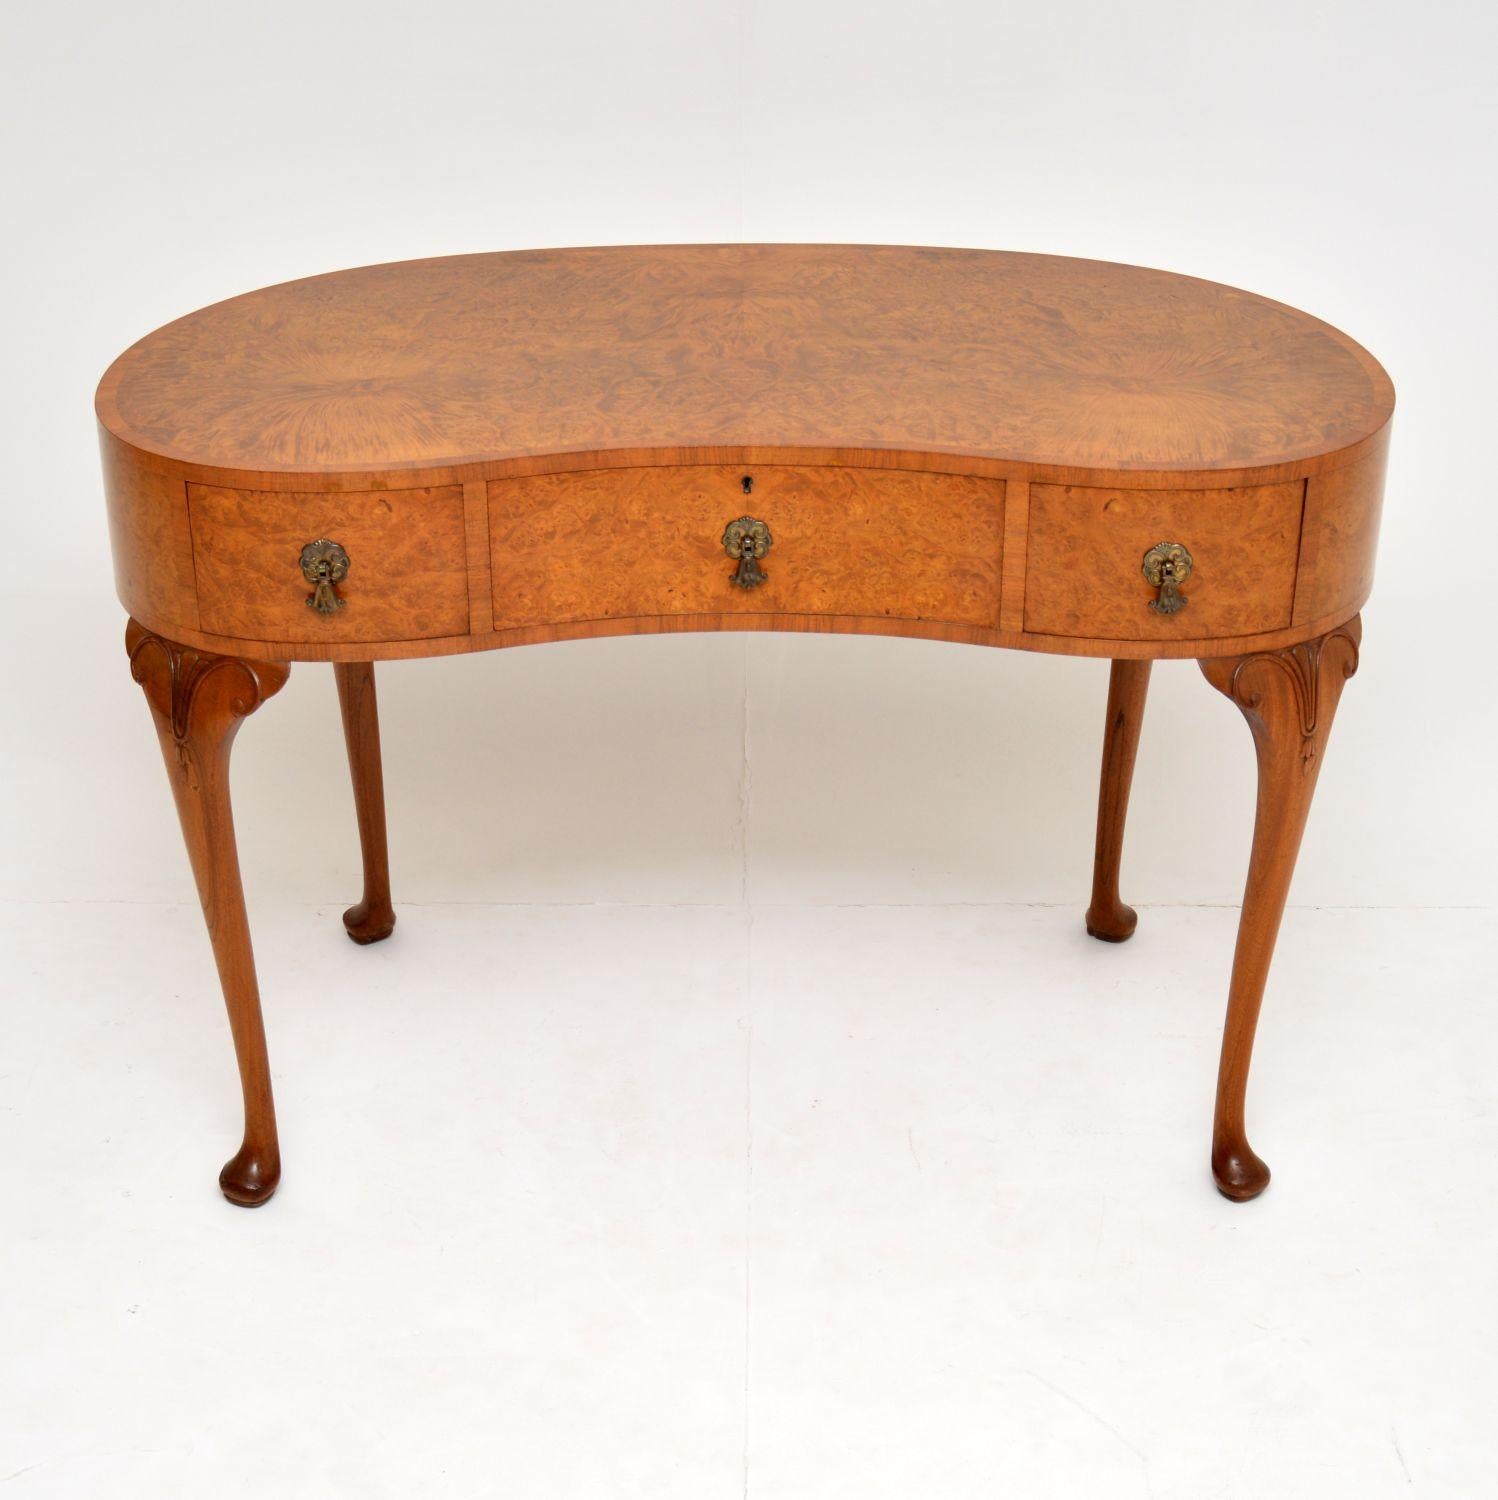 Fine quality antique burr walnut kidney shaped desk or dressing table which was designed & made by “Waring & Gillows”. The metal label in attached to the inside of one of the drawers.

It’s finished & polished all the way around, with a